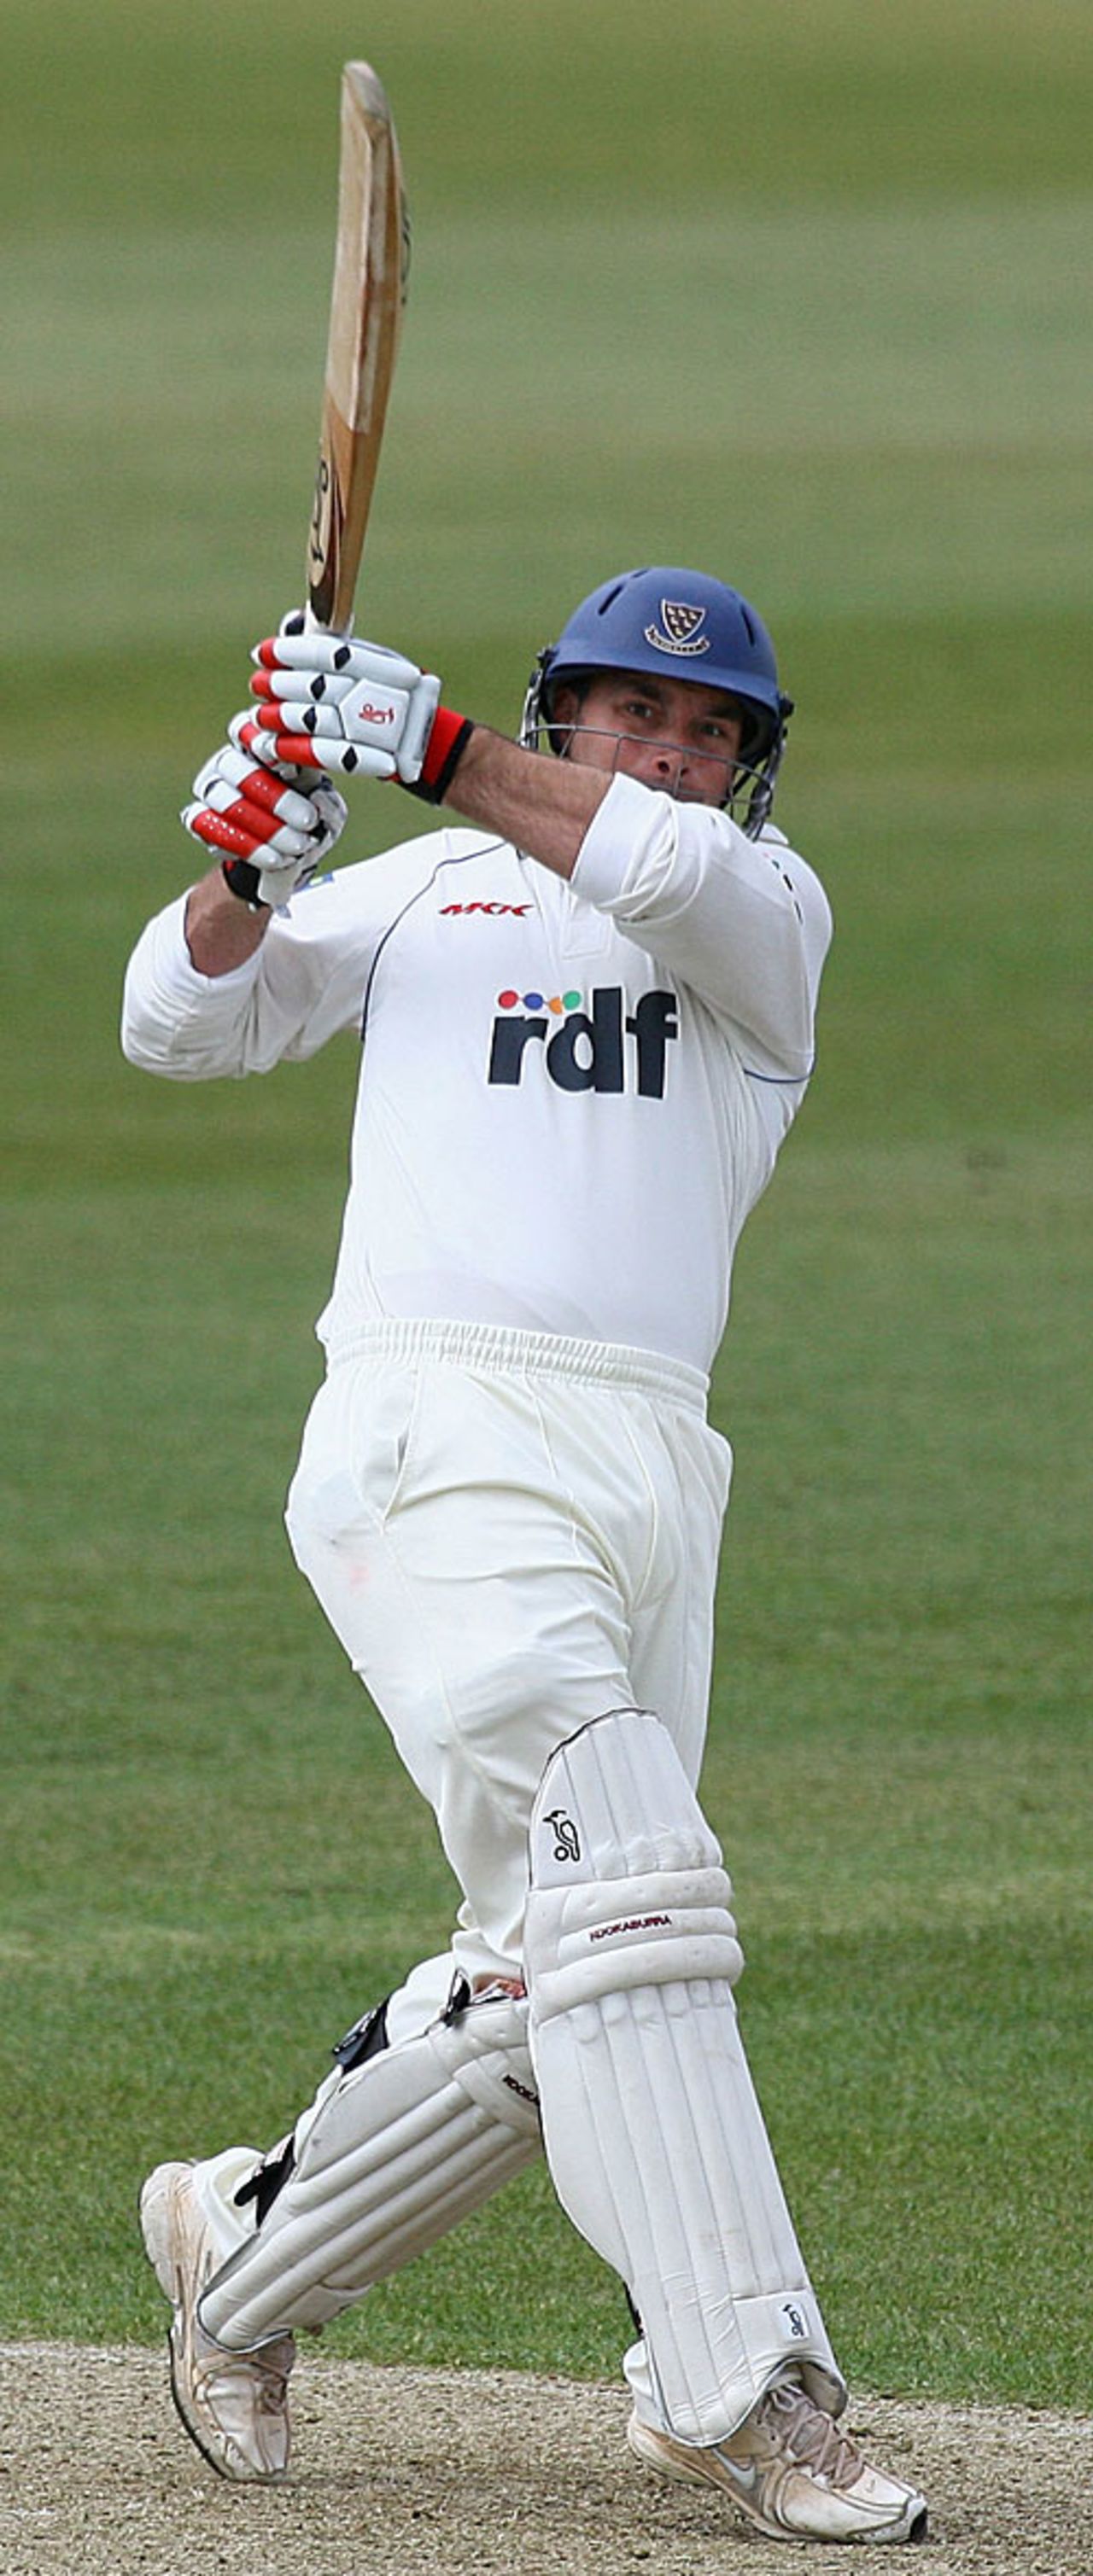 On his toes, Michael Yardy pulls off the front foot, Hampshire v Sussex, Southampton, April 16, 2008